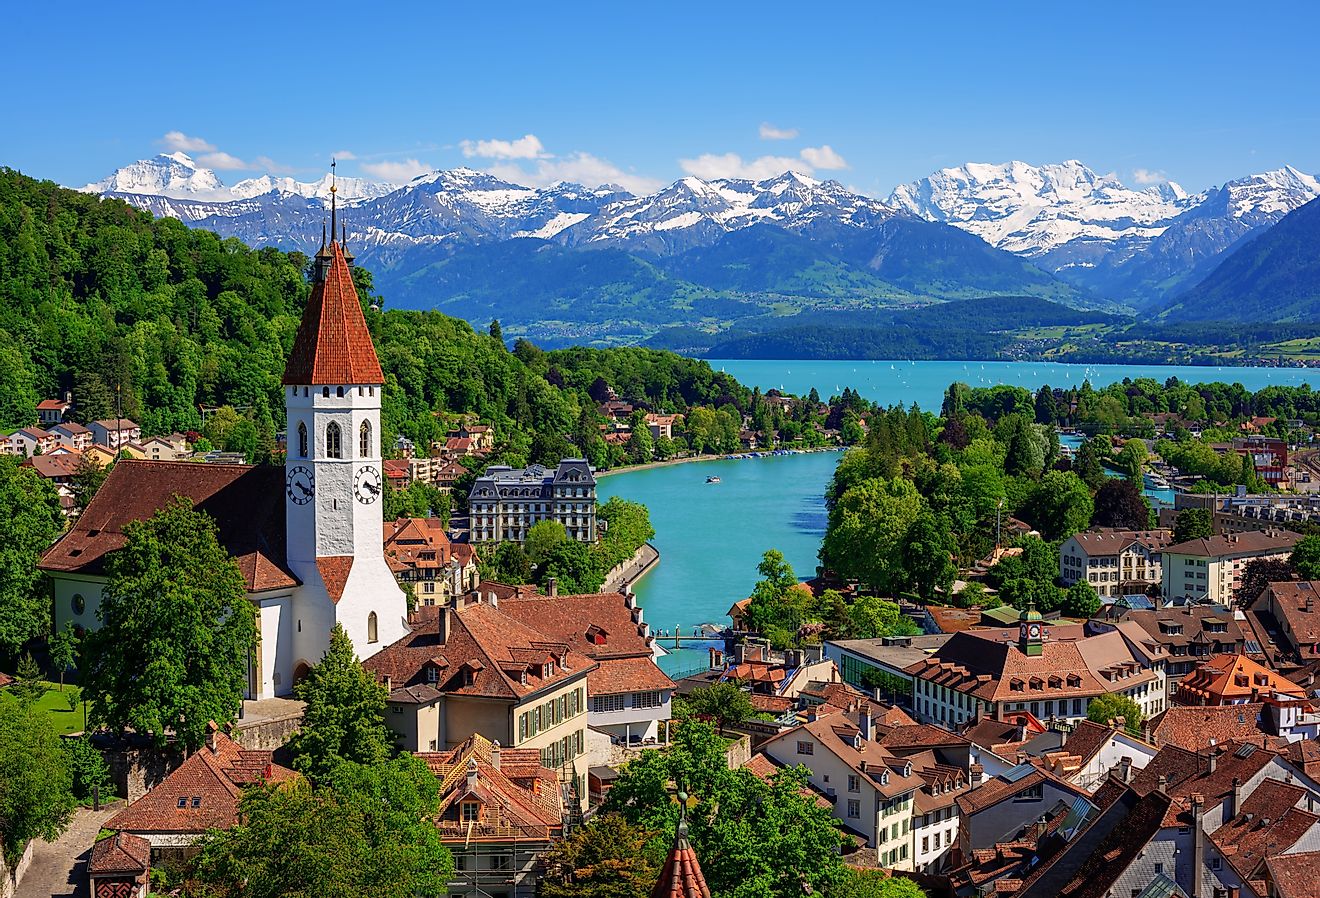 Historical Thun city and Lake Thun with snow covered Bernese Highlands Swiss Alps mountains in background, Canton Bern, Switzerland.